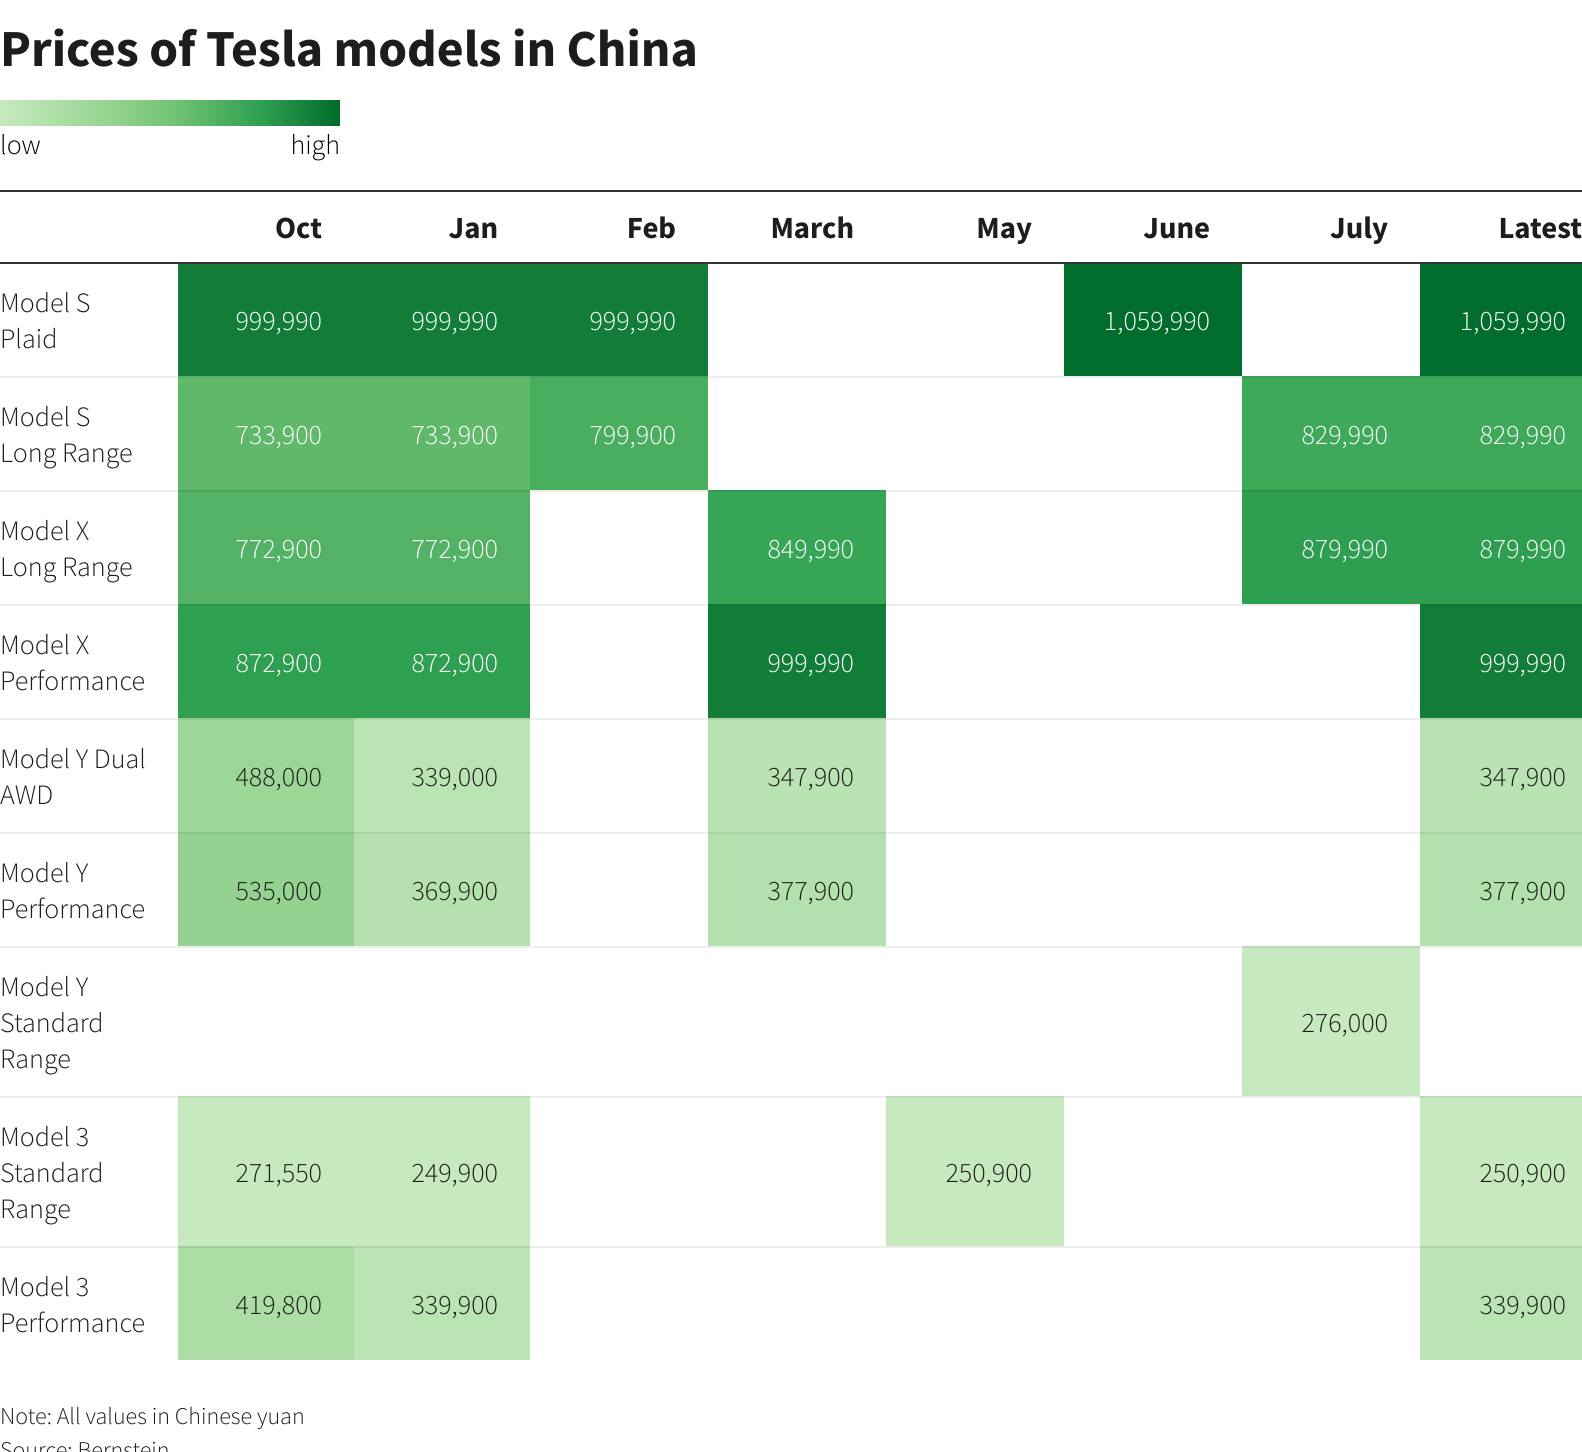 Prices of Tesla models in China